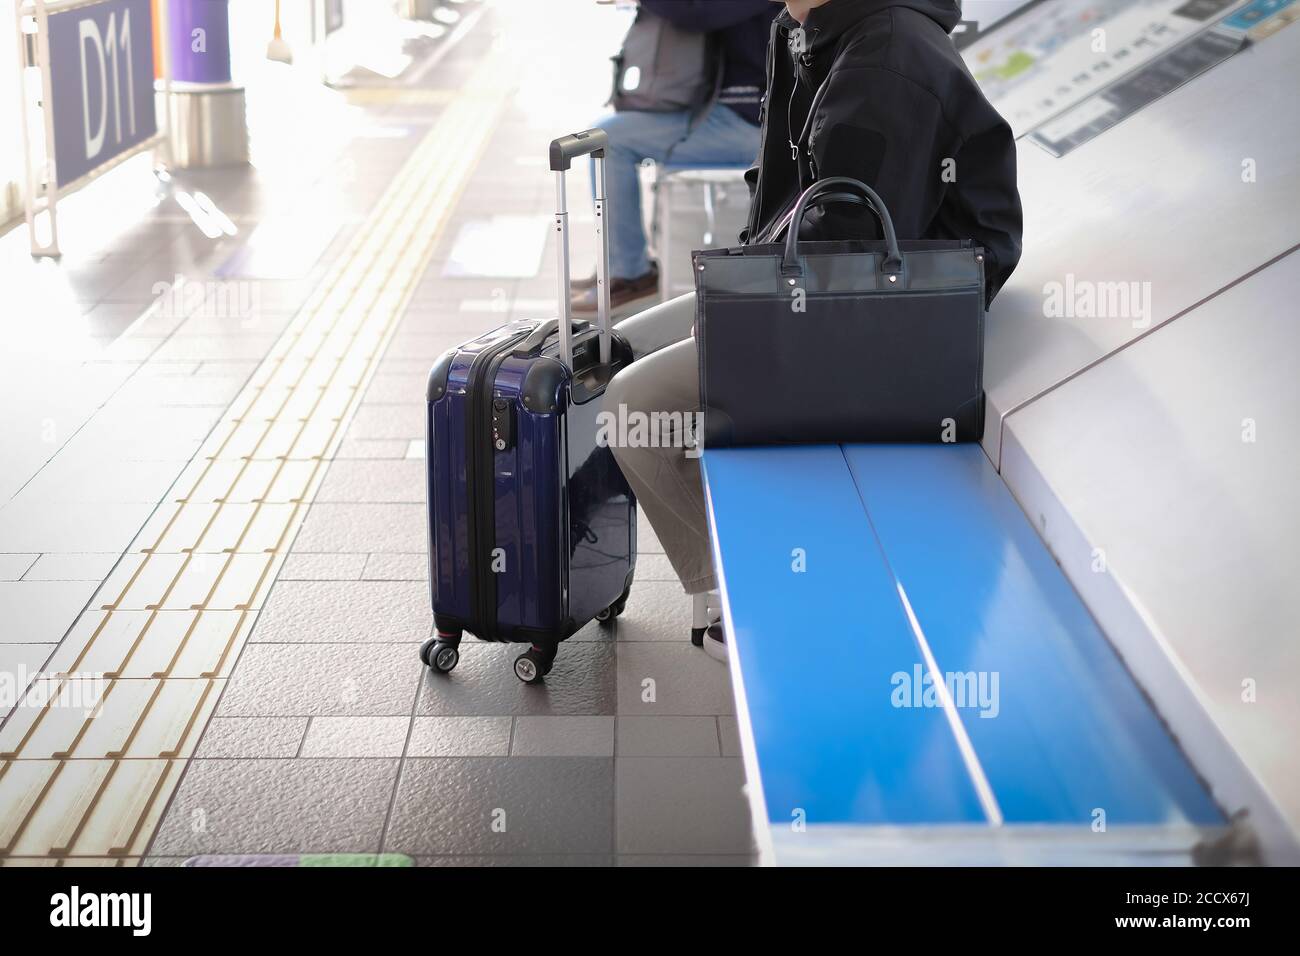 Passenger waiting for bus and sky train at the station concept Stock Photo